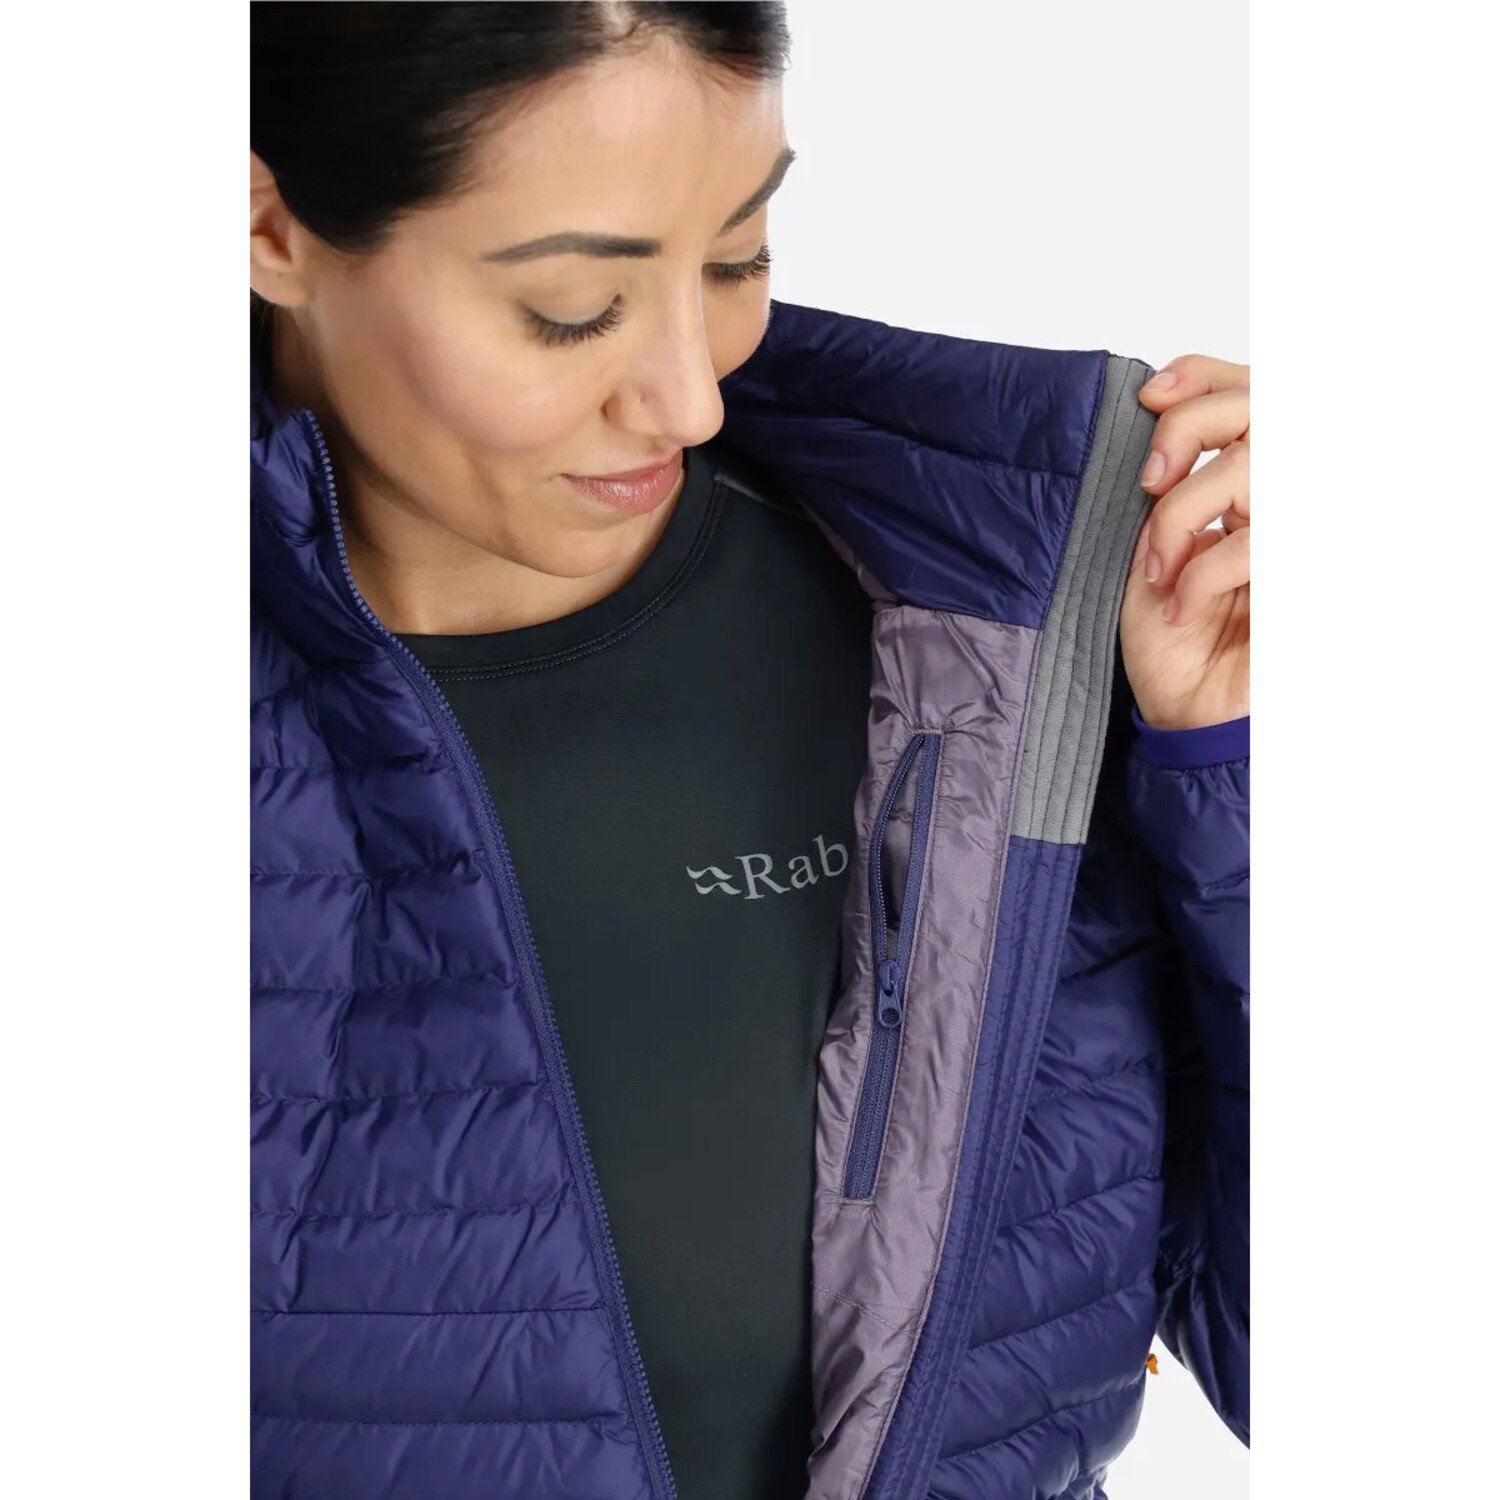 Rab Women's Cirrus Insulated Jacket - True Outdoors